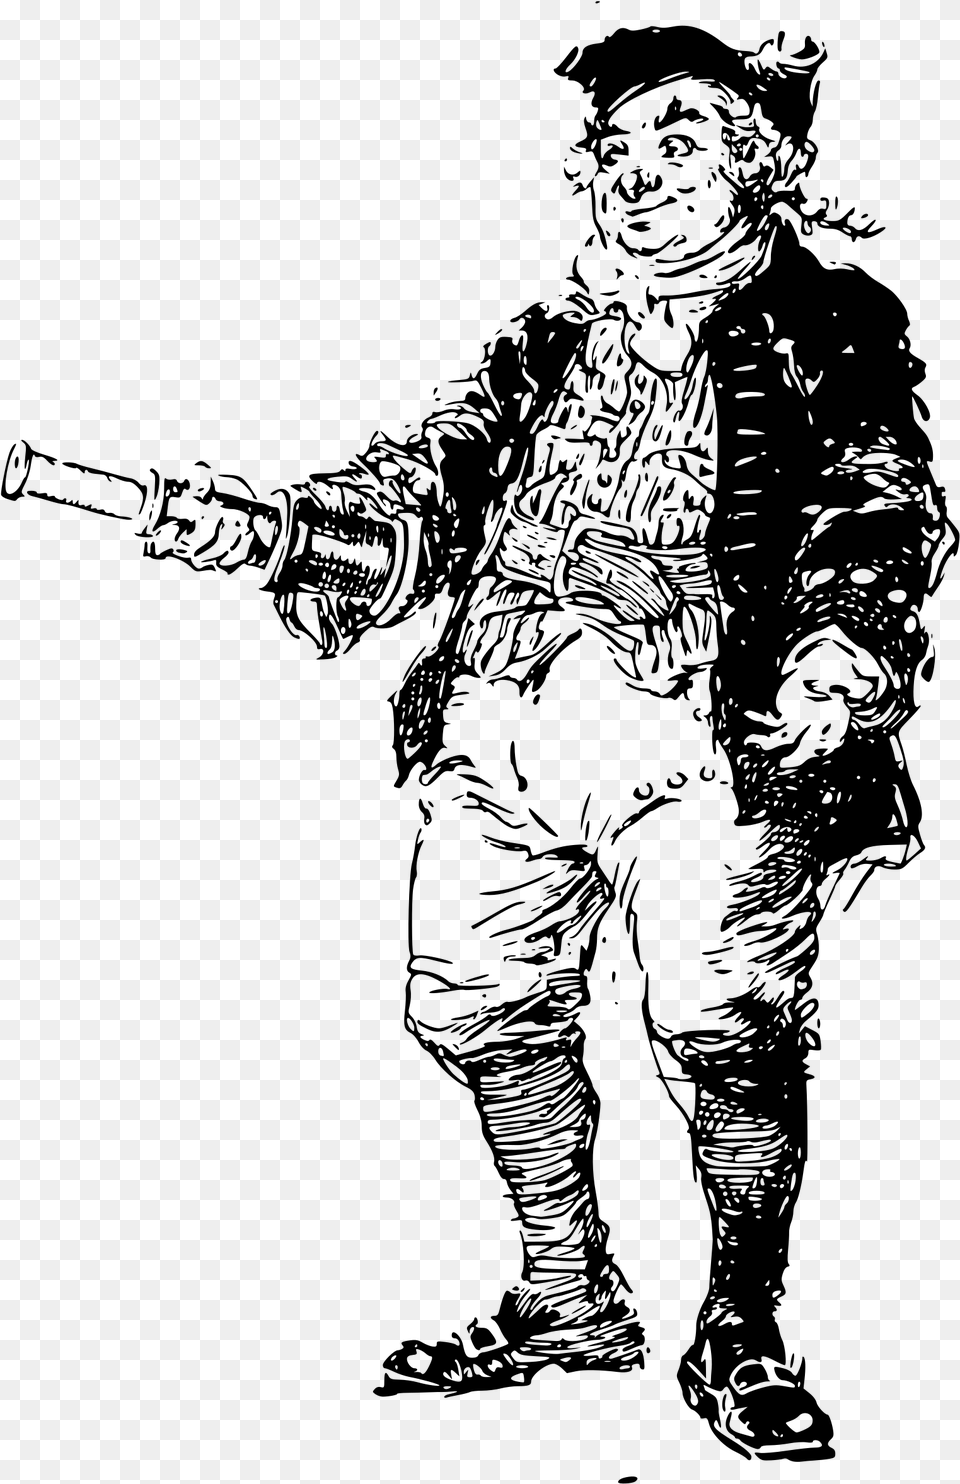 This Icons Design Of A Captain With A Spyglass, Gray Free Transparent Png